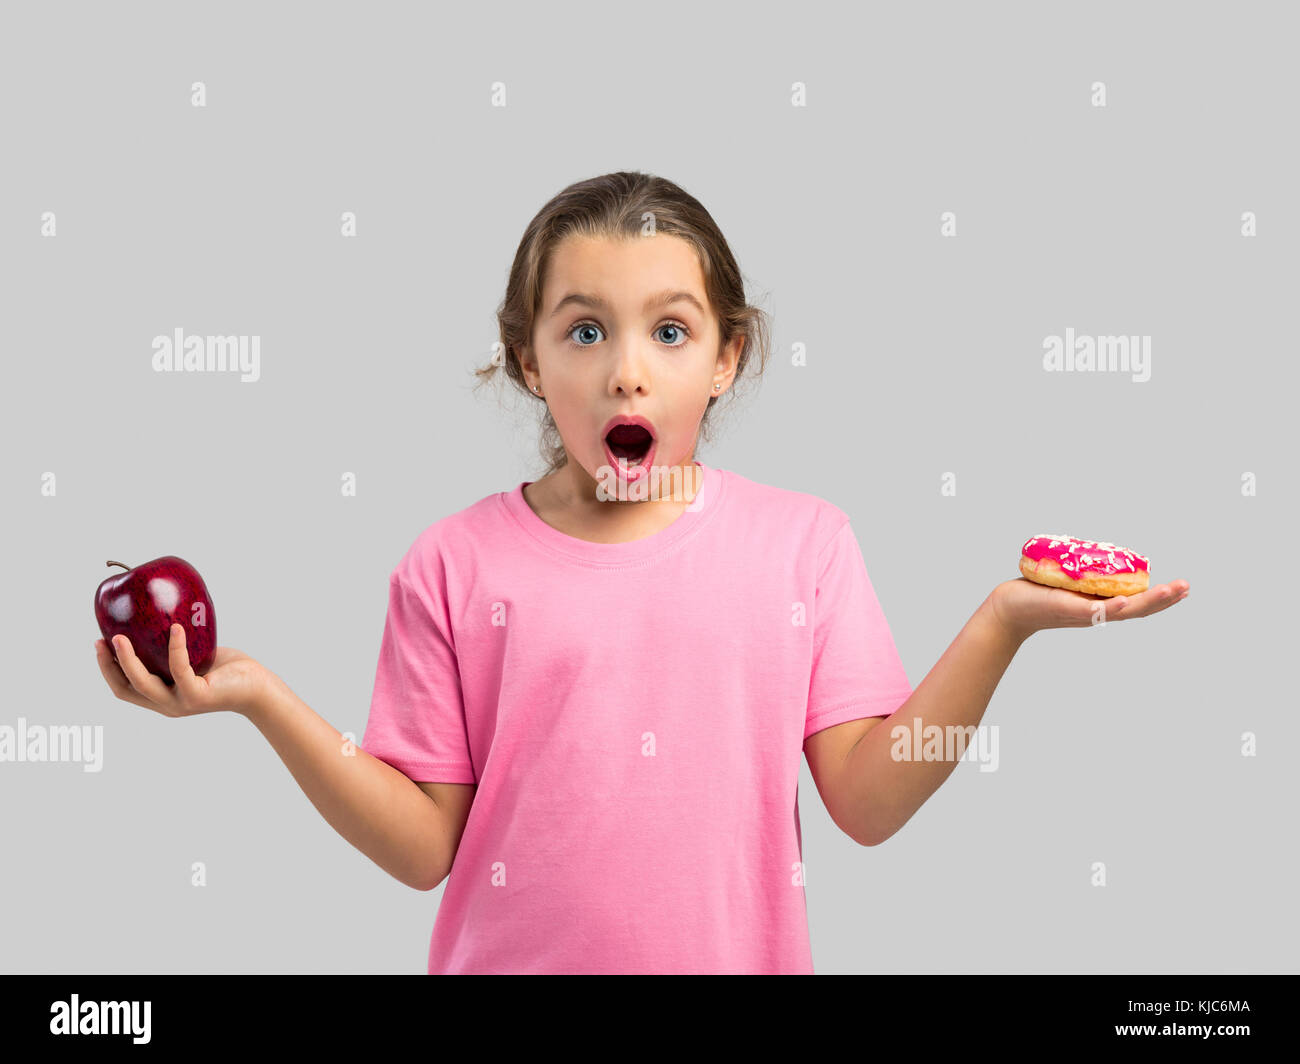 Little girl smiling and choosing between a apple and a donut Stock Photo